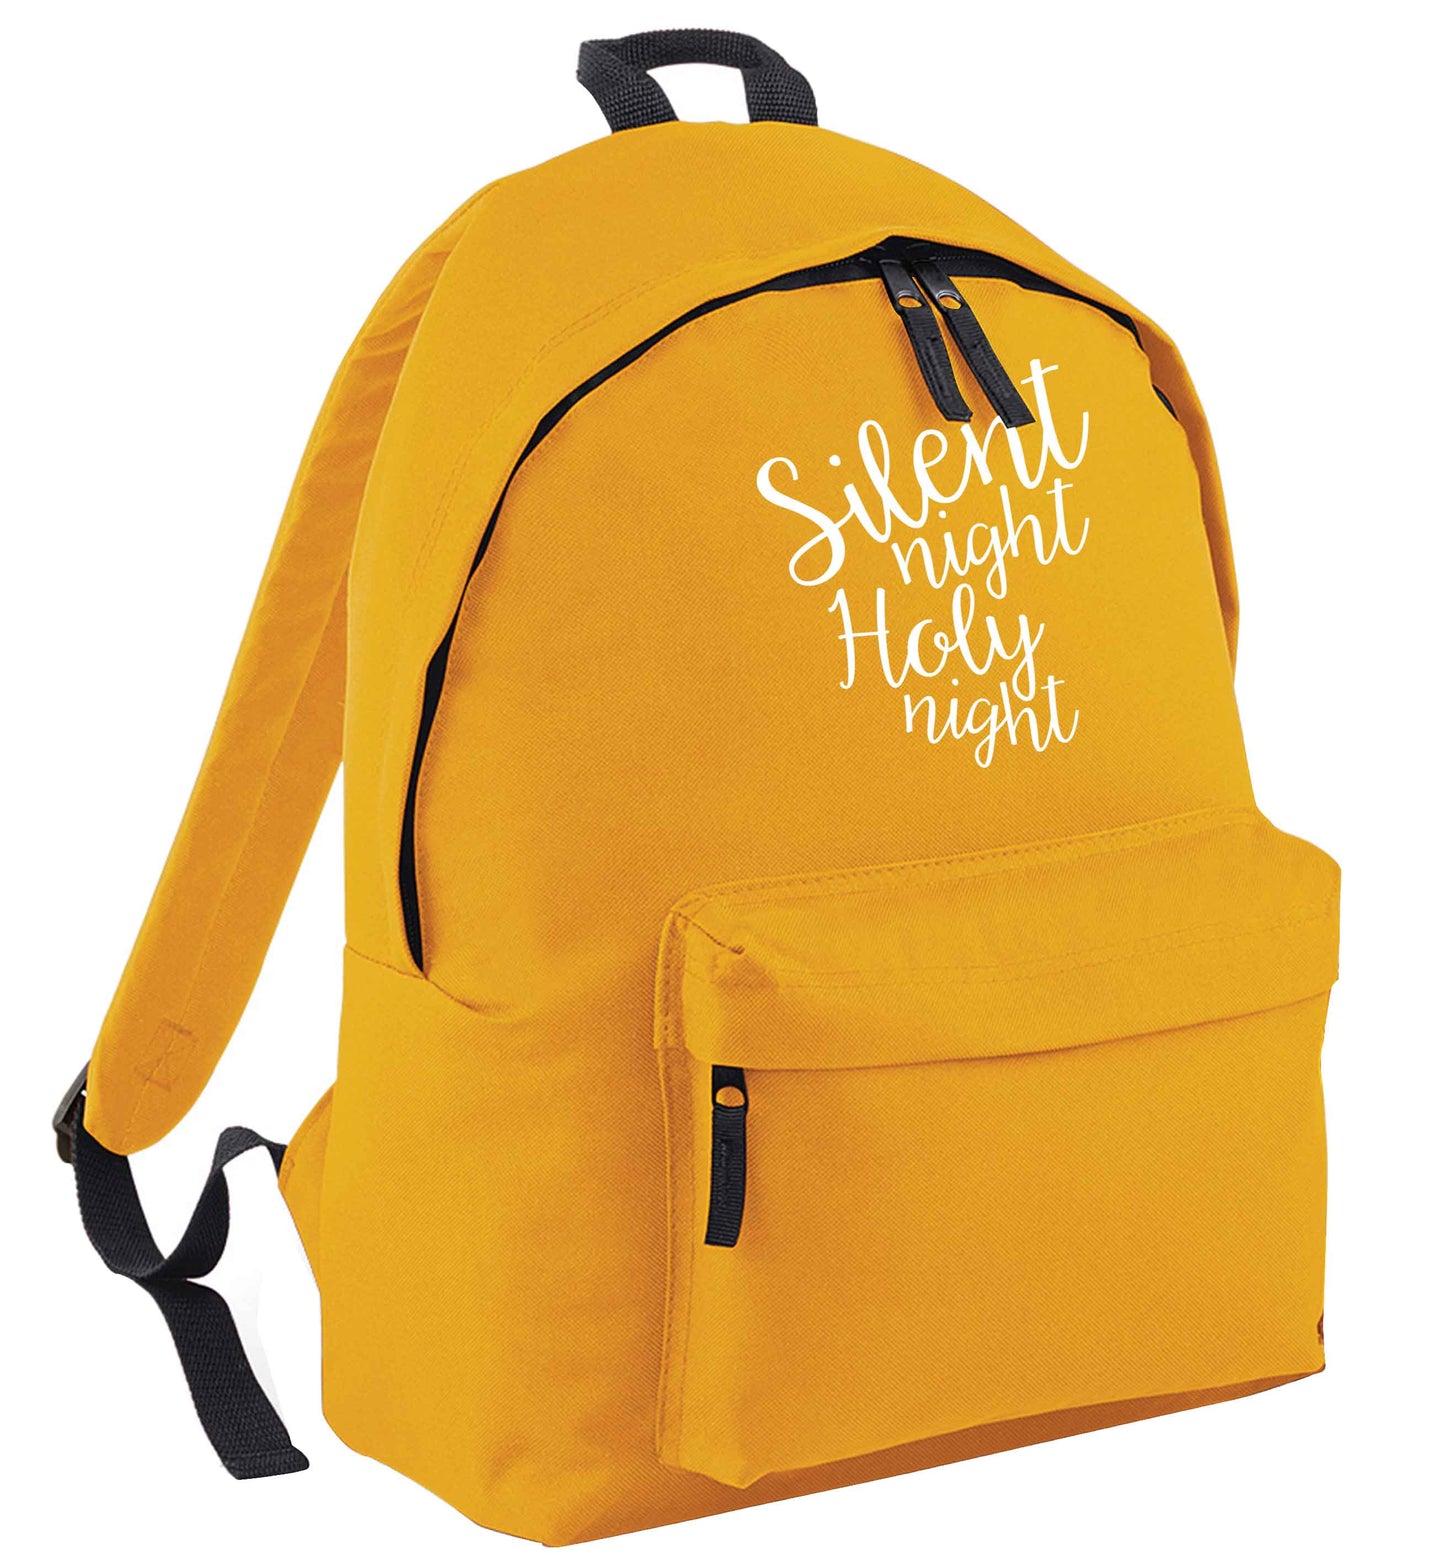 Silent night holy night mustard adults backpack